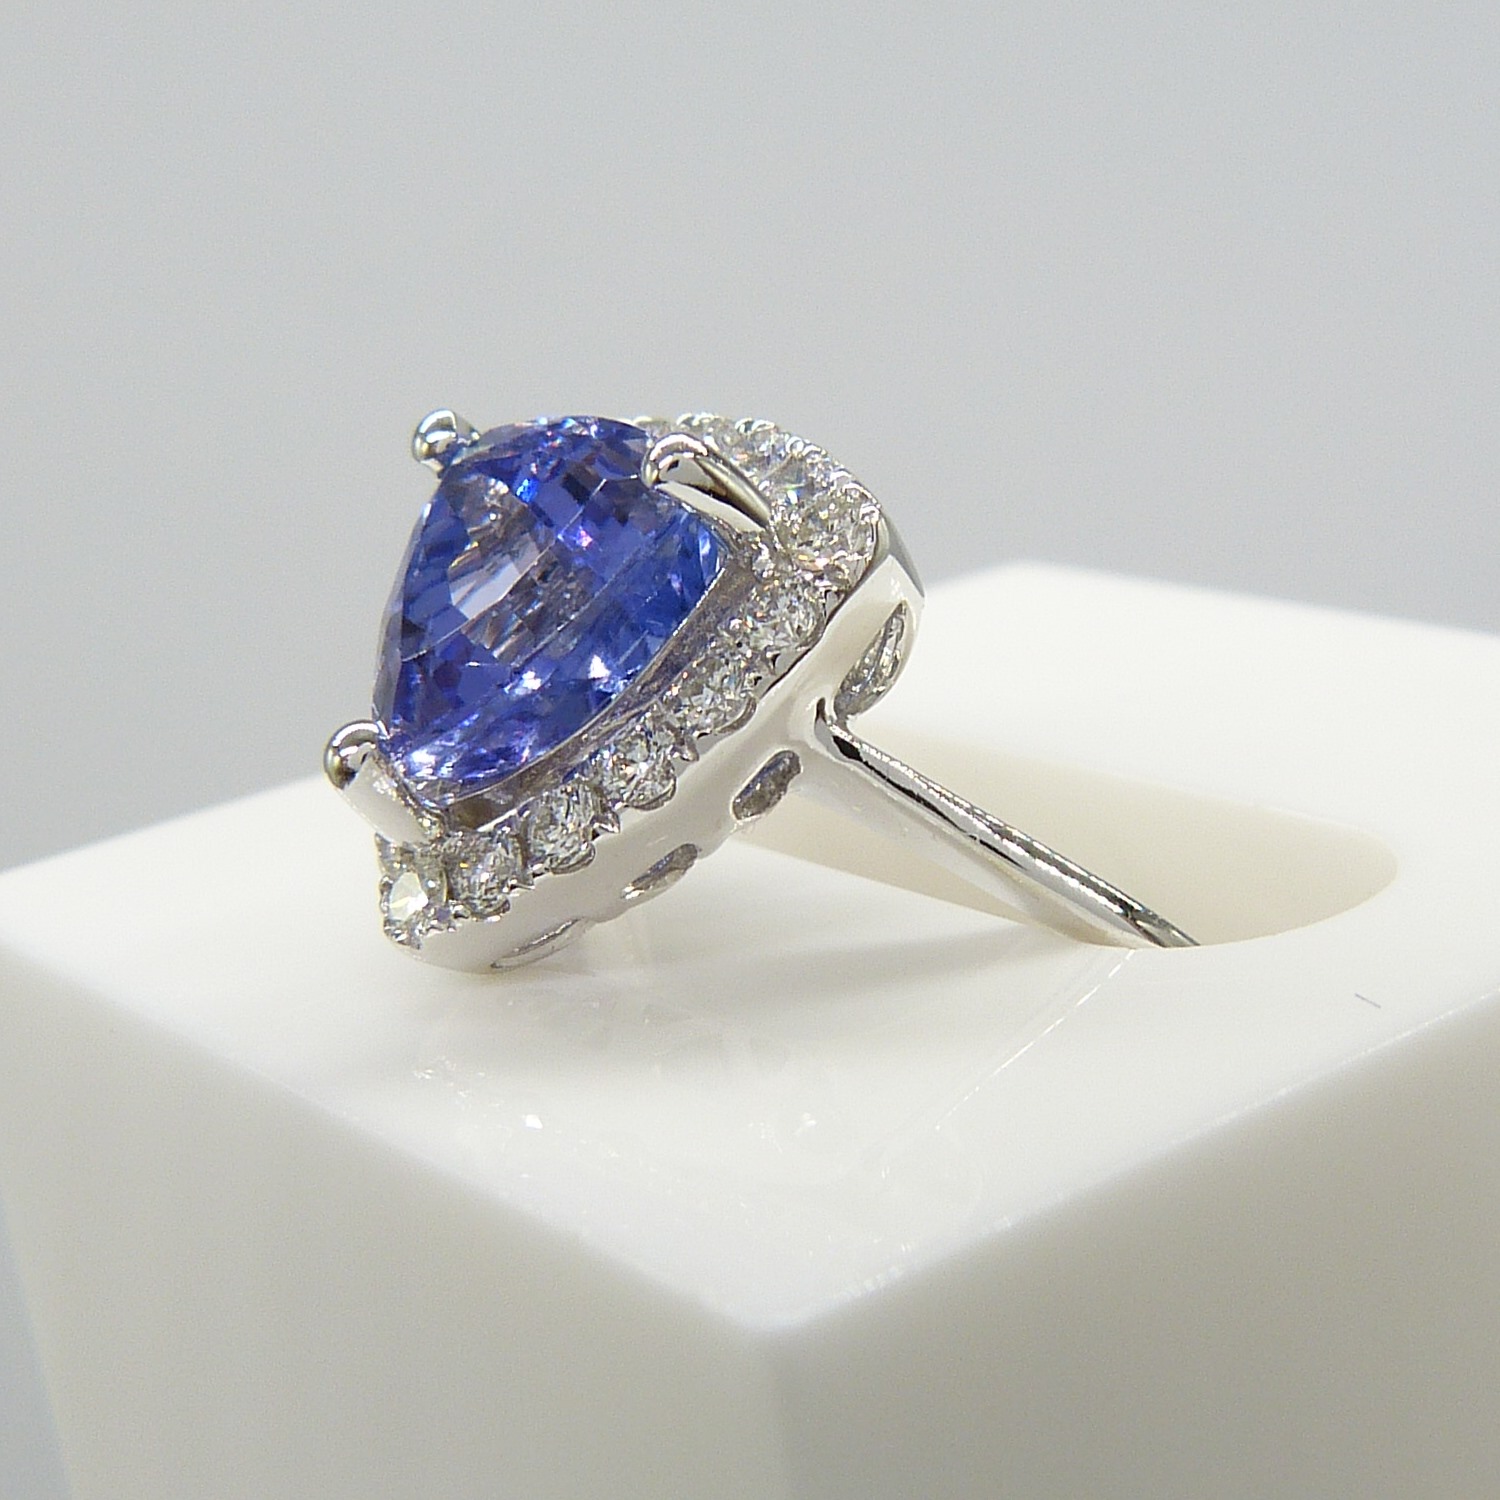 A superb 1.88ct trilliant-cut tanzanite and diamond halo dress ring in 18ct white gold - Image 2 of 7